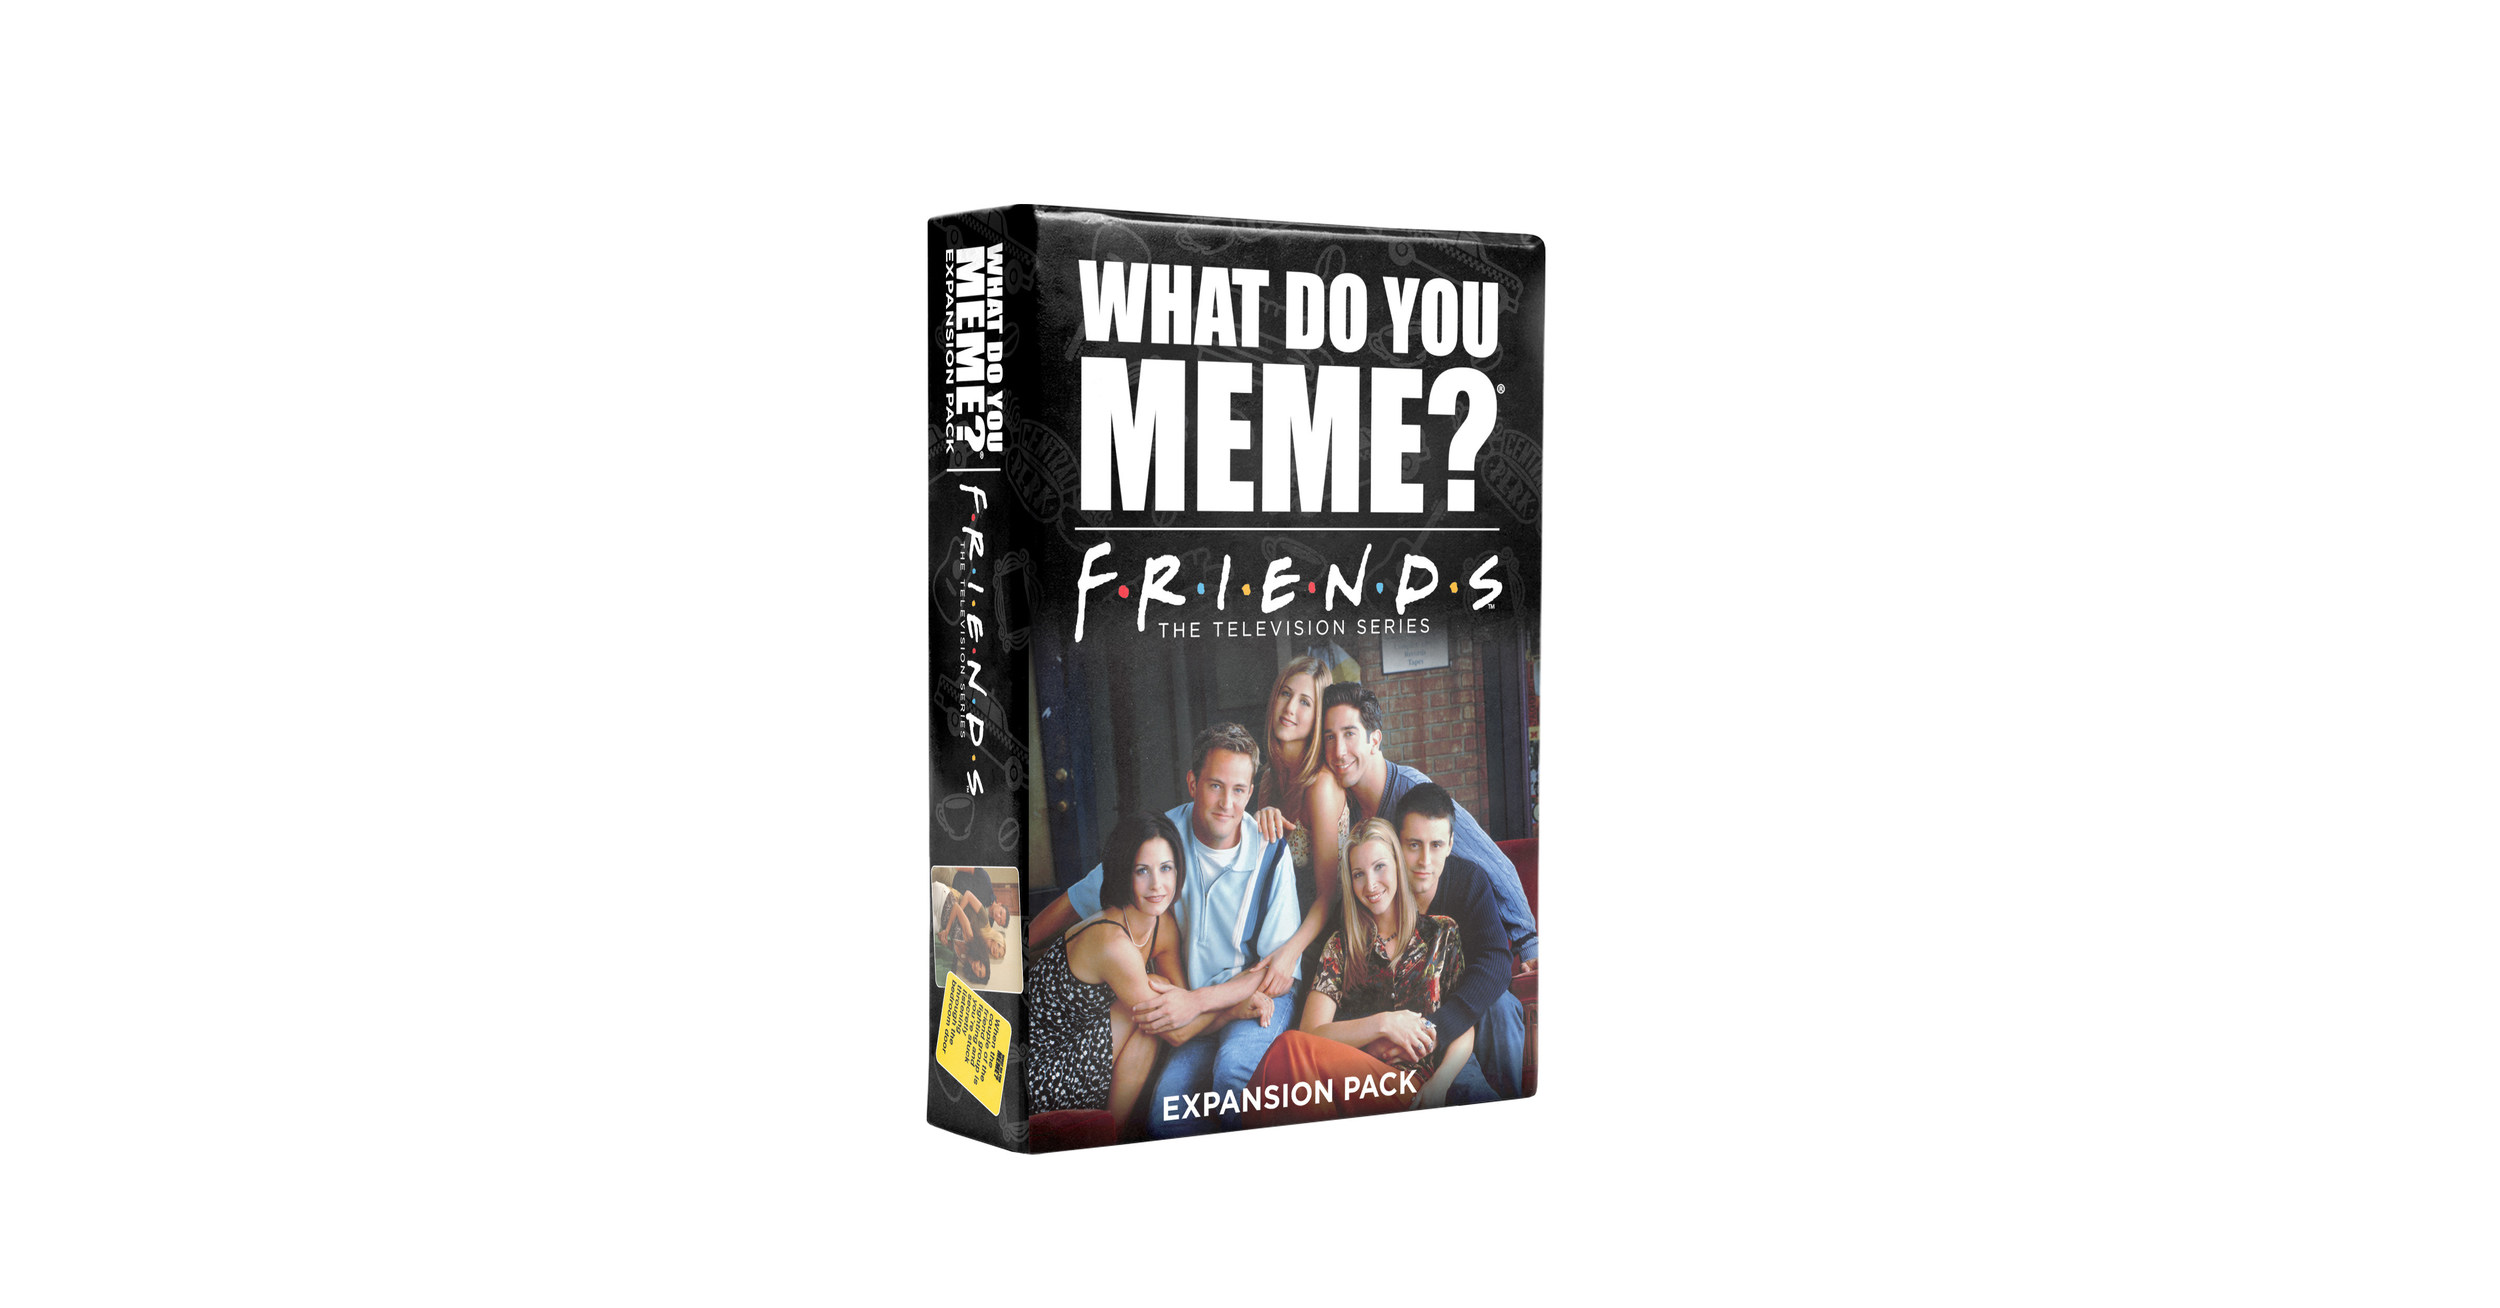 What Do You Meme? Basic Expansion Pack